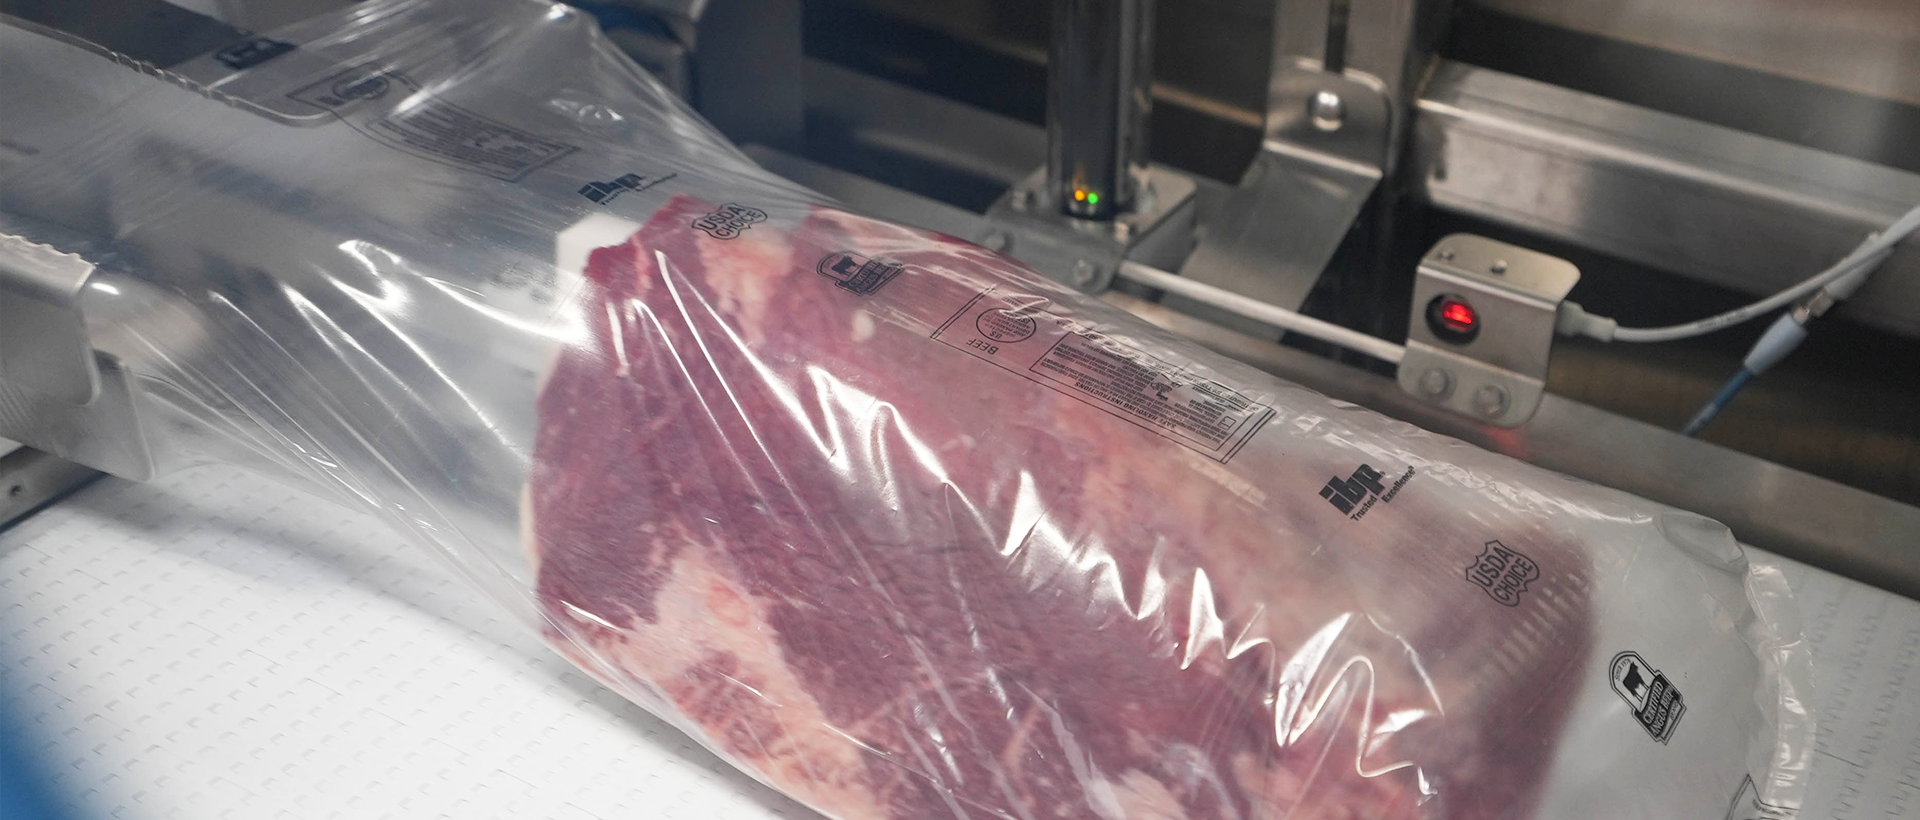 meat loaded into a bag by a robotic bag loader